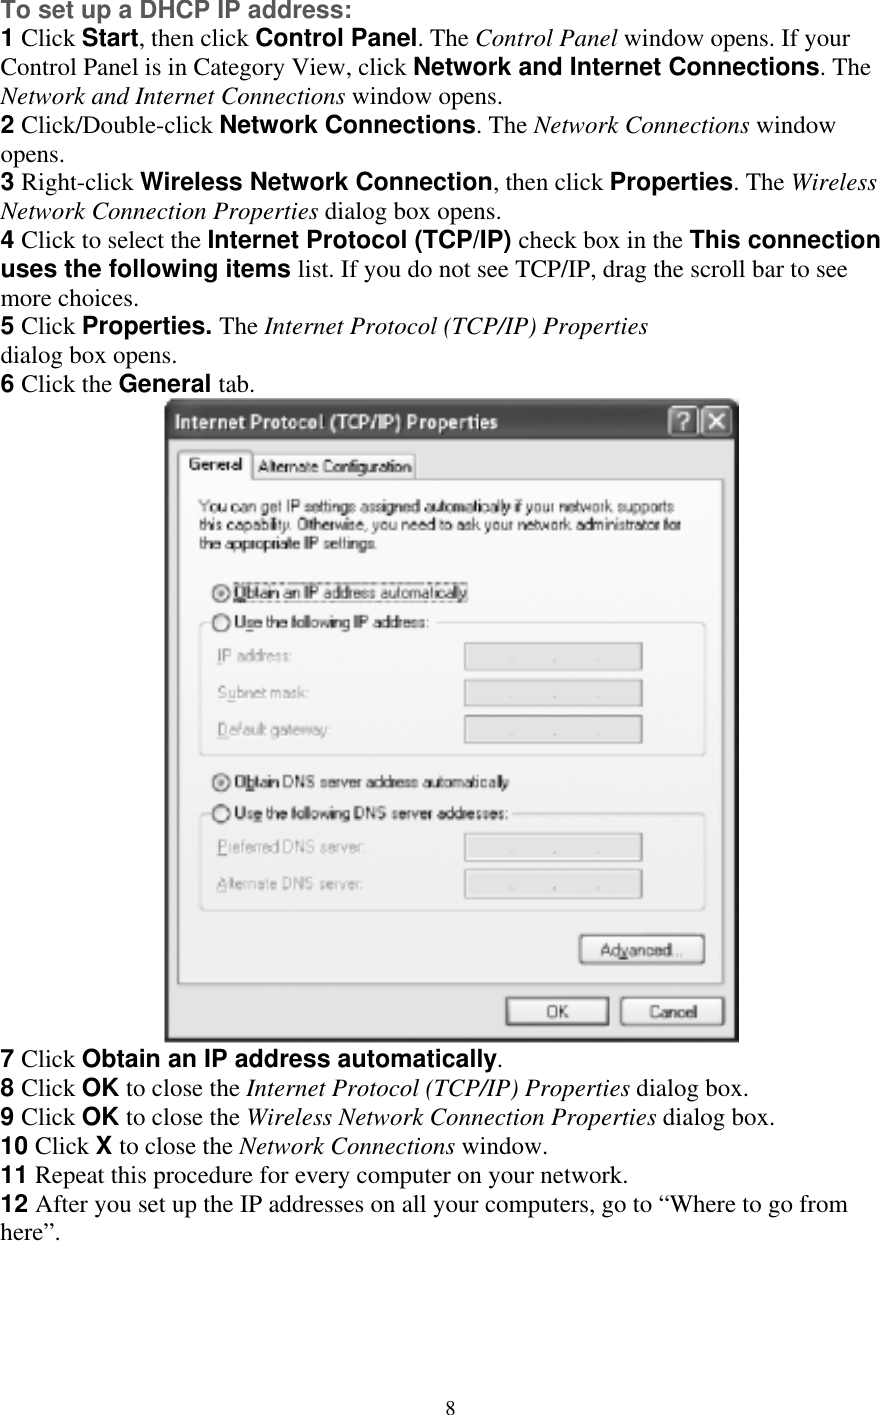 To set up a DHCP IP address: 1 Click Start, then click Control Panel. The Control Panel window opens. If your Control Panel is in Category View, click Network and Internet Connections. ThNetwork and Internet Connections window opens.  e  ialog box opens.  Click the General tab. 2 Click/Double-click Network Connections. The Network Connections window opens. 3 Right-click Wireless Network Connection, then click Properties. The Wireless Network Connection Properties dialog box opens. 4 Click to select the Internet Protocol (TCP/IP) check box in the This connectionuses the following items list. If you do not see TCP/IP, drag the scroll bar to see more choices. 5 Click Properties. The Internet Protocol (TCP/IP) Properties d6 7 Click Obtain an IP address automatically. 8 Click OK to close the Internet Protocol (TCP/IP) Properties dialog box. 9 Click OK to close the Wireless Network Connection Properties dialog box. 10 Click X to close the Network Connections window. 11 Repeat this procedure for every computer on your network. 12 After you set up the IP addresses on all your computers, go to “Where to go from here”.     8